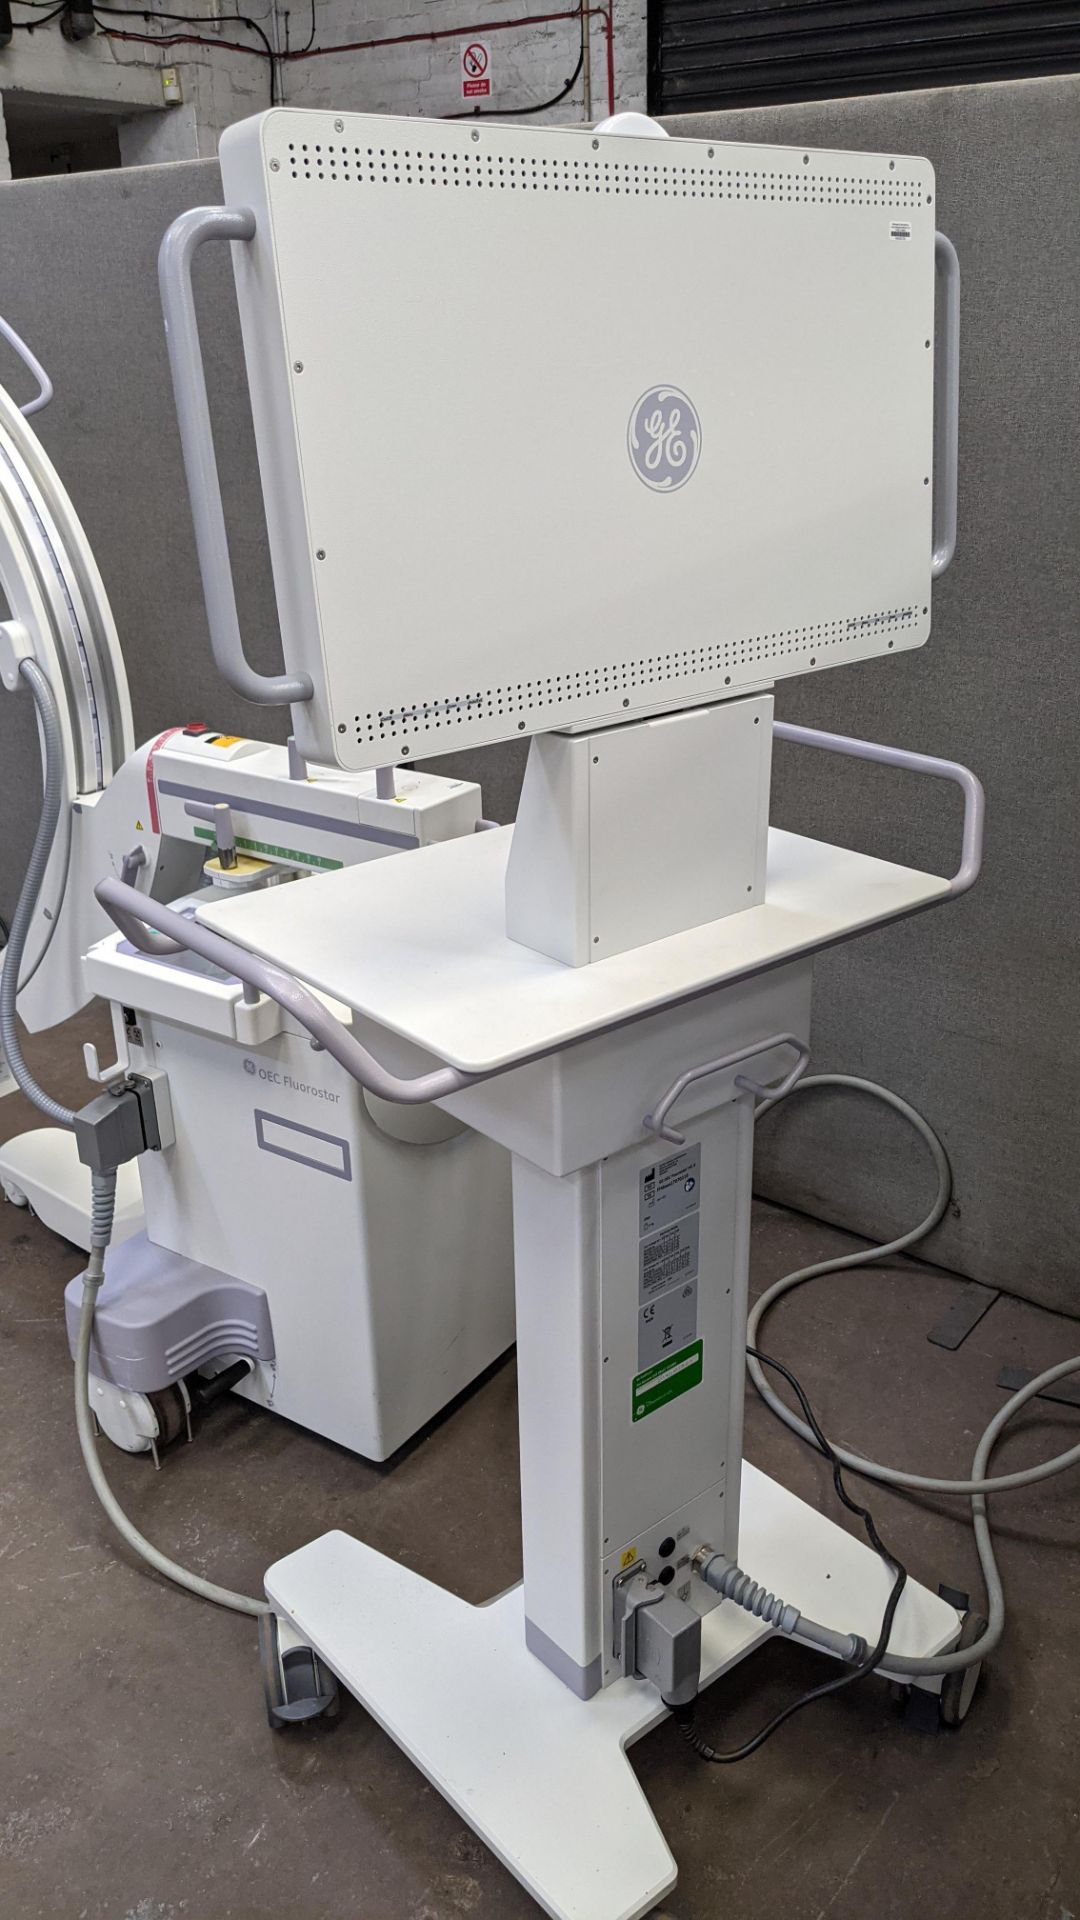 GE-OEC Fluorostar imaging system, purchased new in August 2017. EO4 Series. - Image 41 of 68